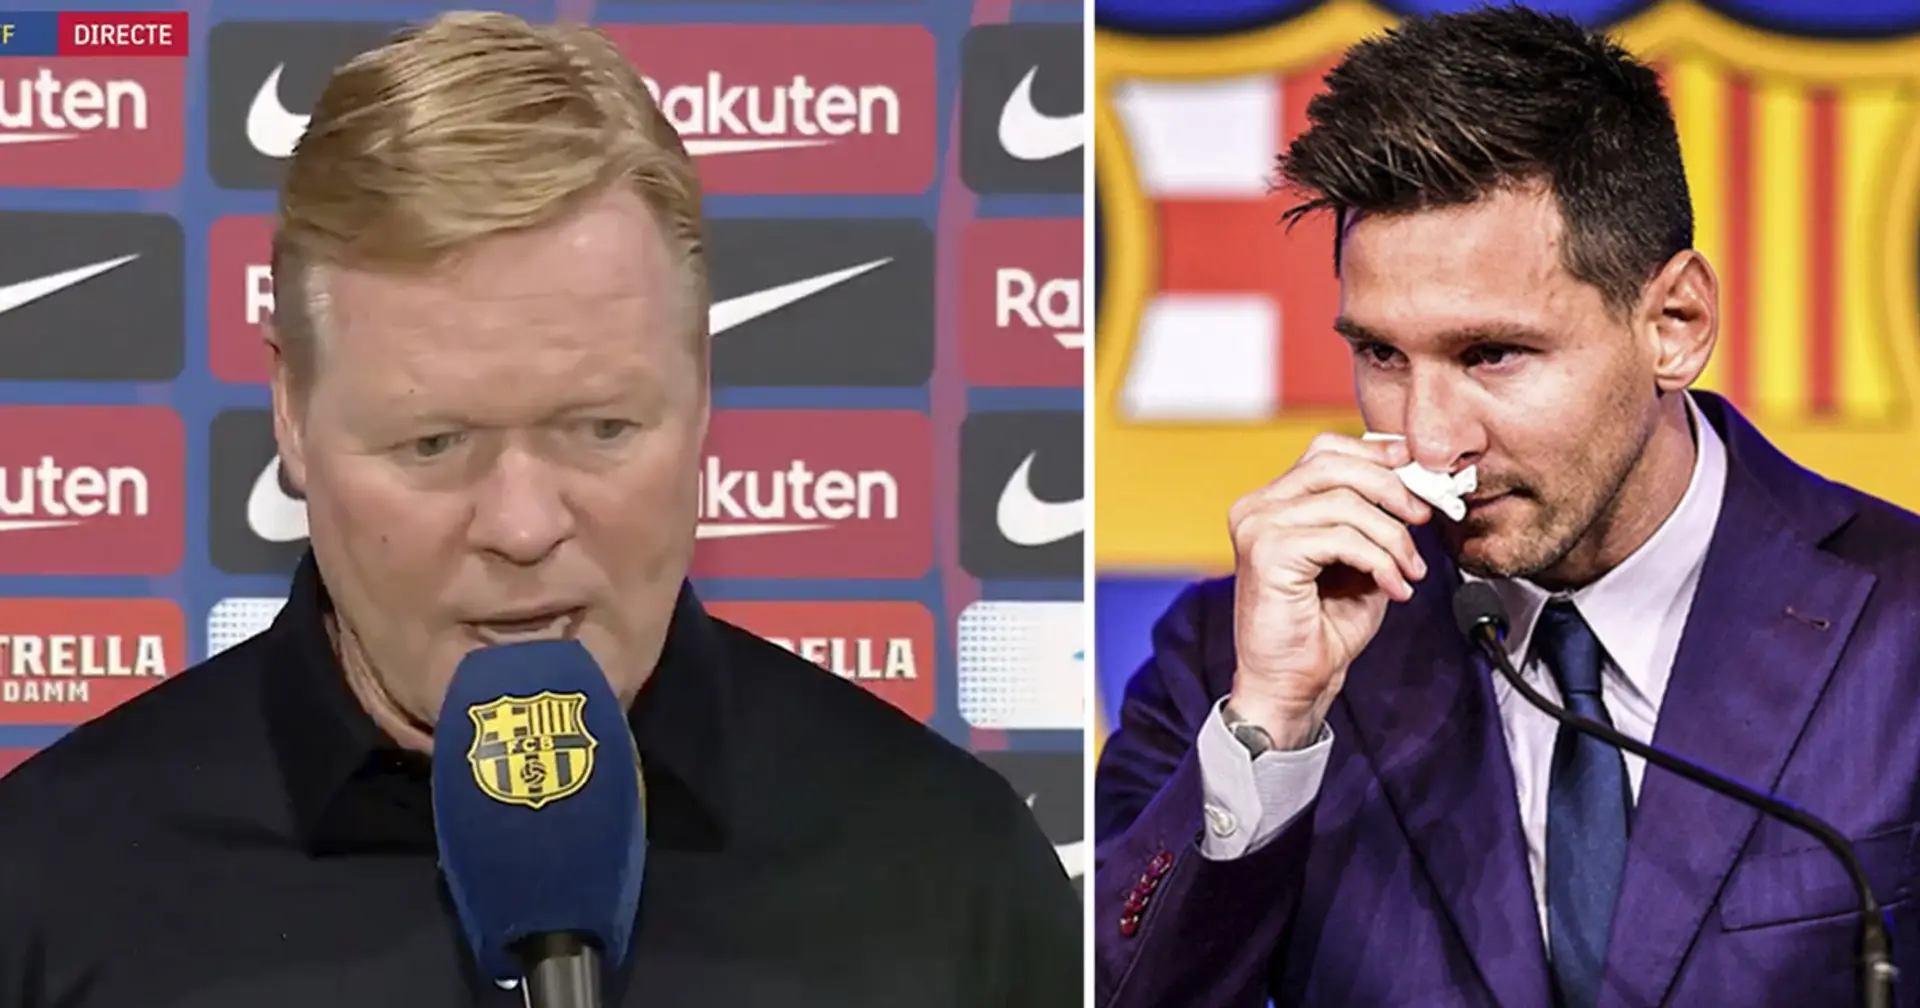 'We will not have those goals scored by Messi': Koeman reacts to Leo's exit, names one thing Barca should improve